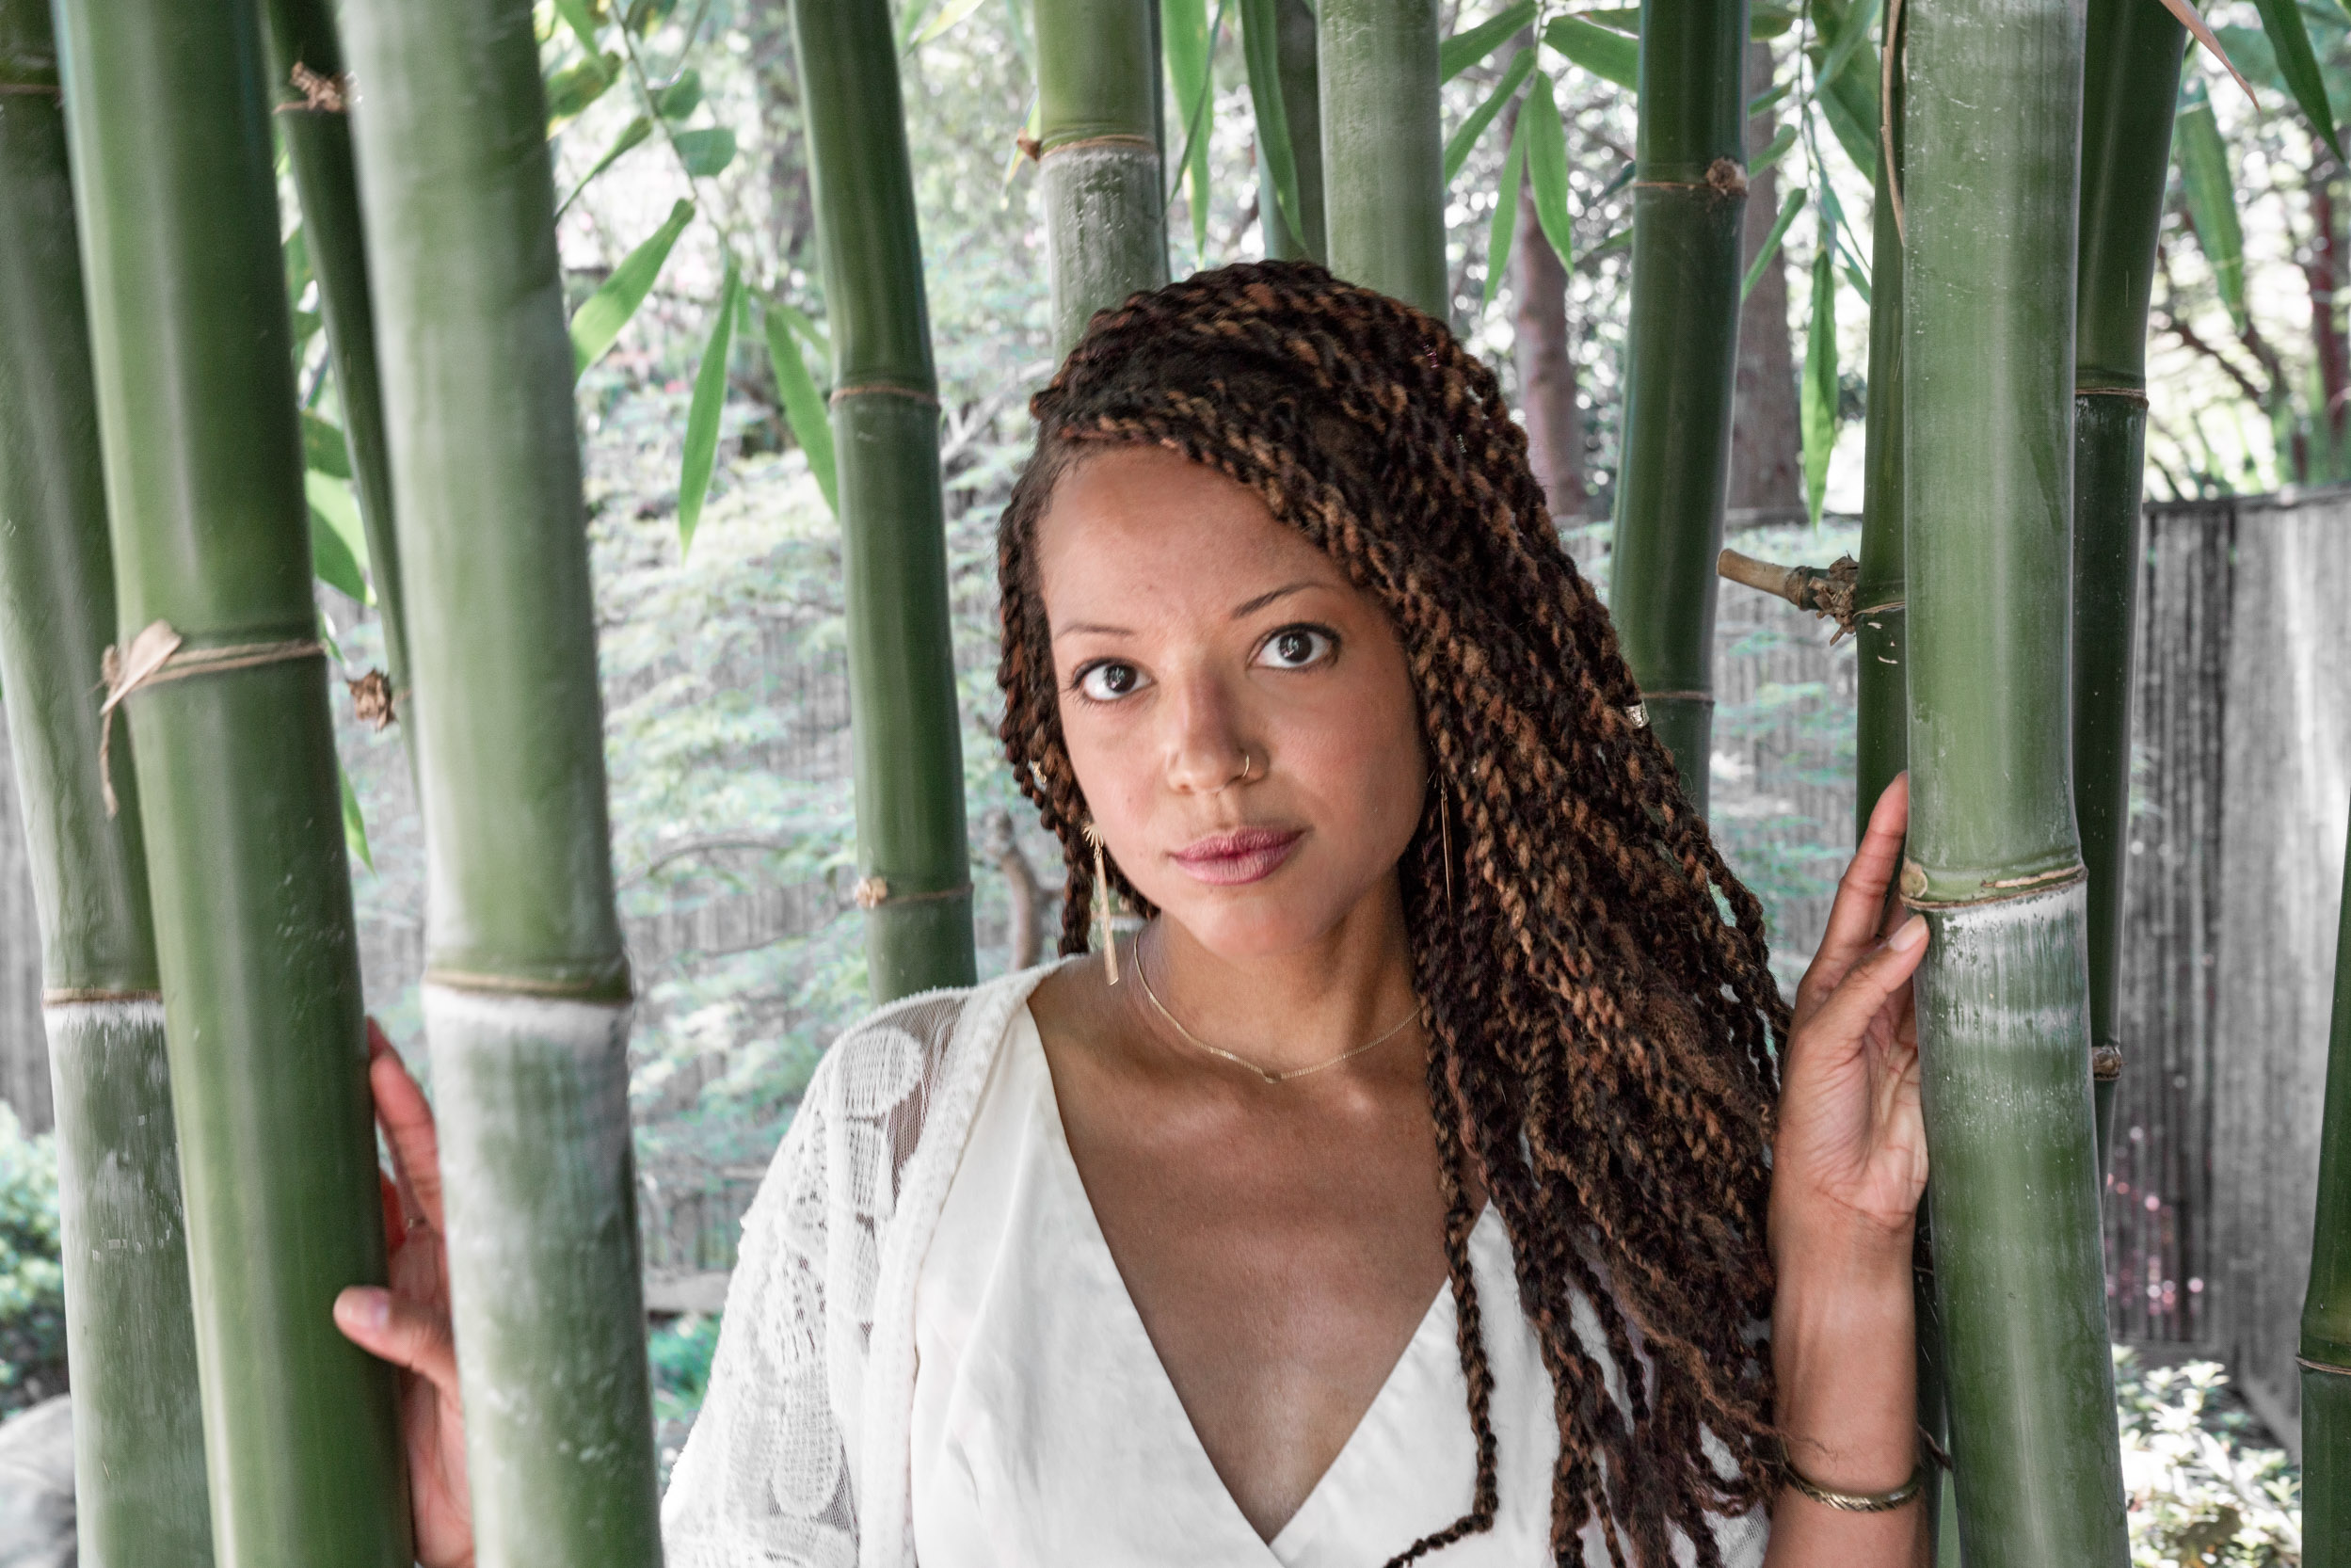 a woman modeling in a garden of bamboo trees in the New Orleans City Park Botanical Garden